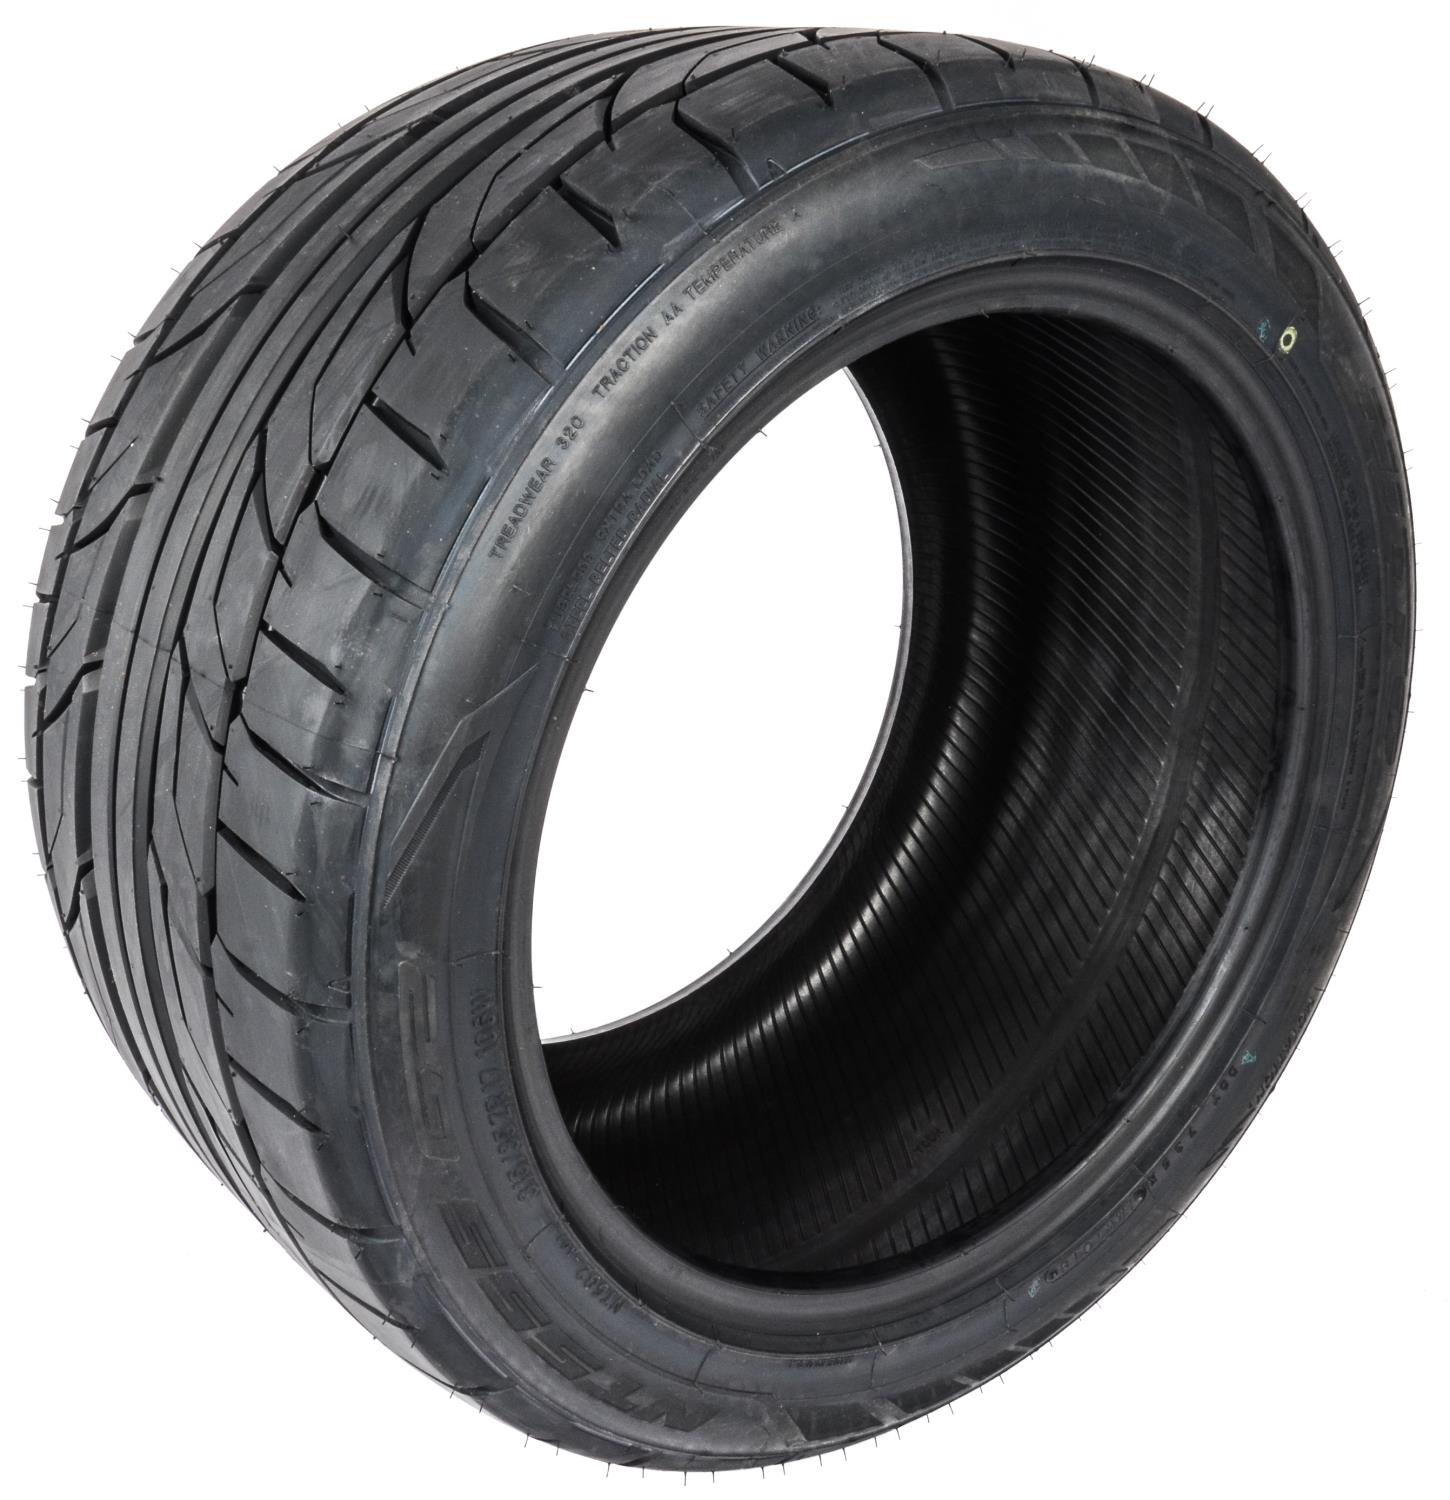 211340 NT555 G2 Summer UHP Radial Tire 315/35R17